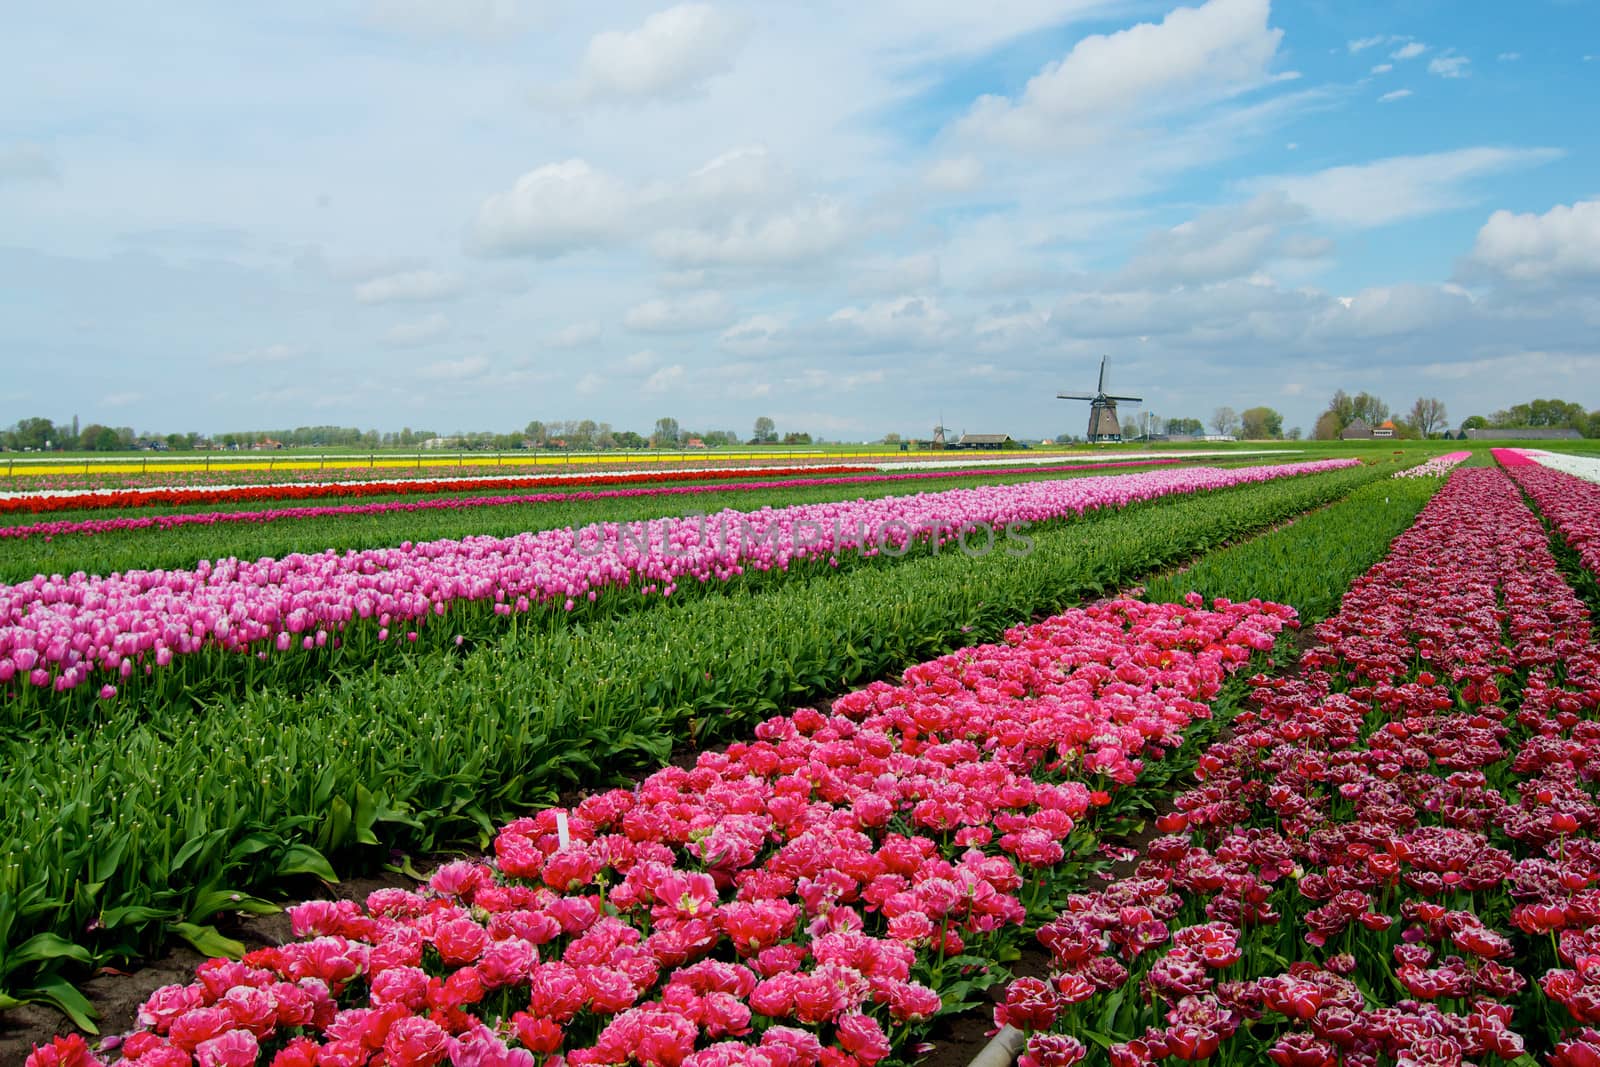 pPnk, red and orange tulip field in North Holland during spring.